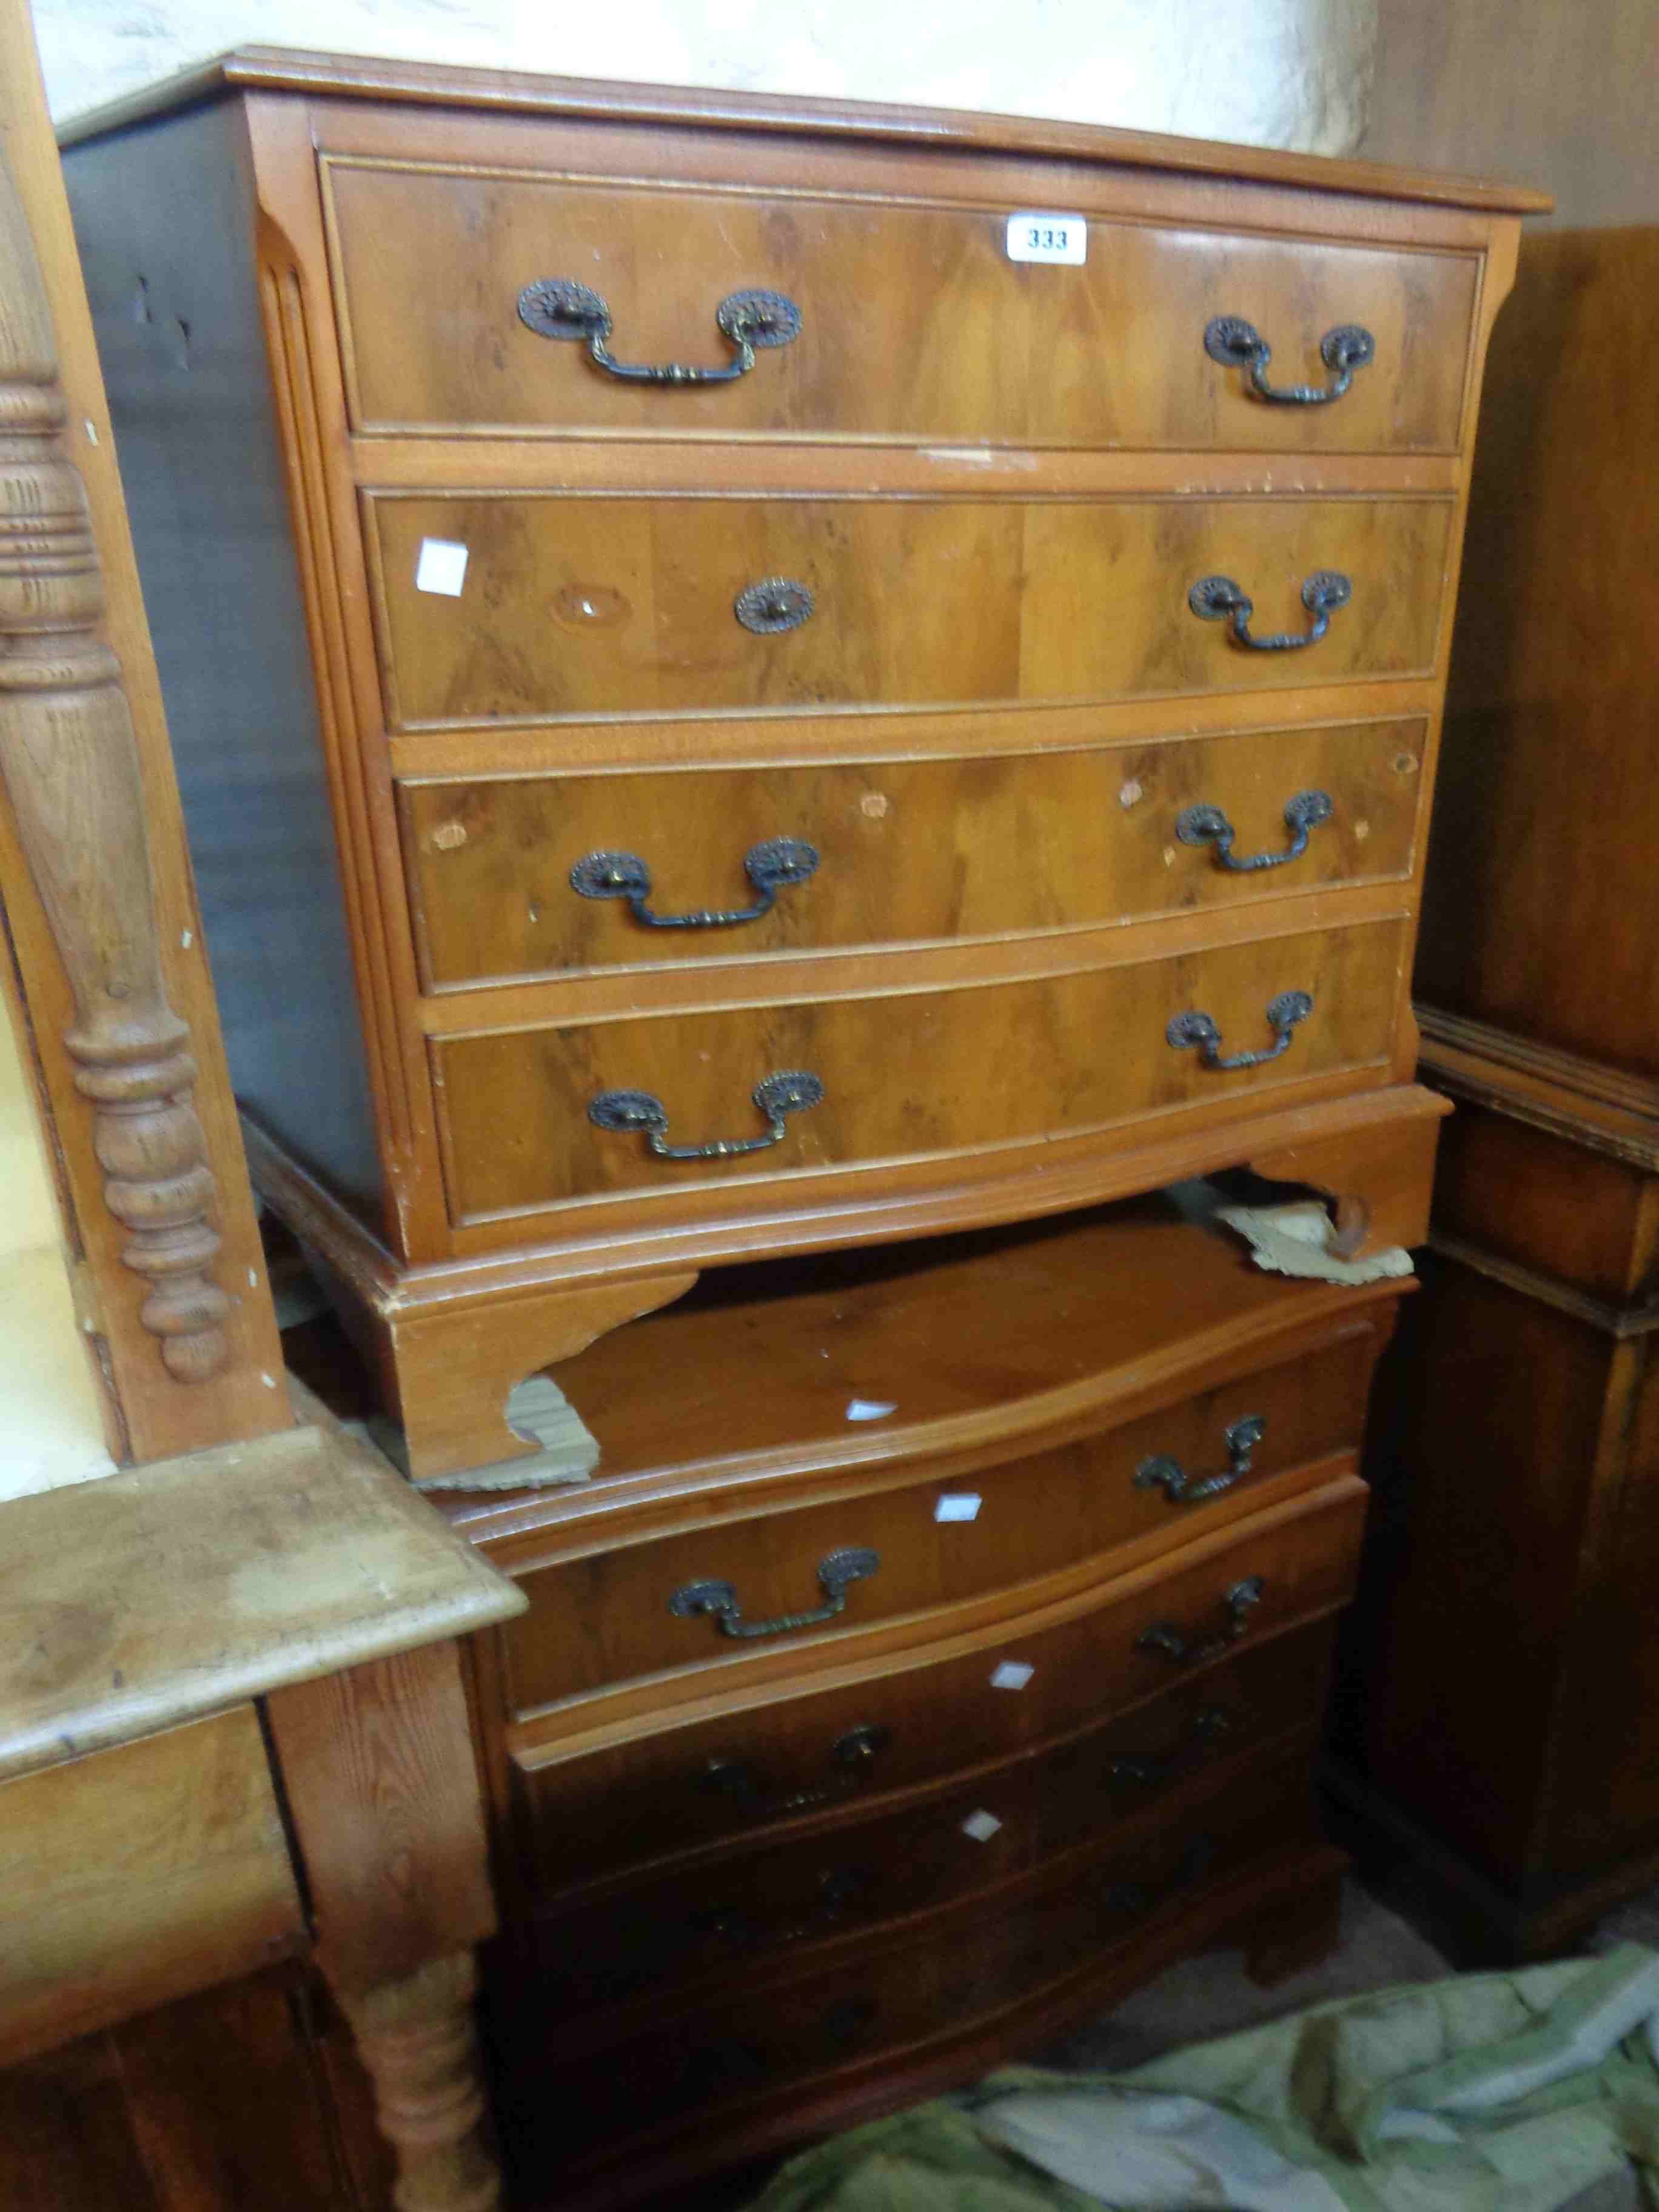 A pair of 62cm reproduction yew wood serpentine front chests, each with four long drawers, set on